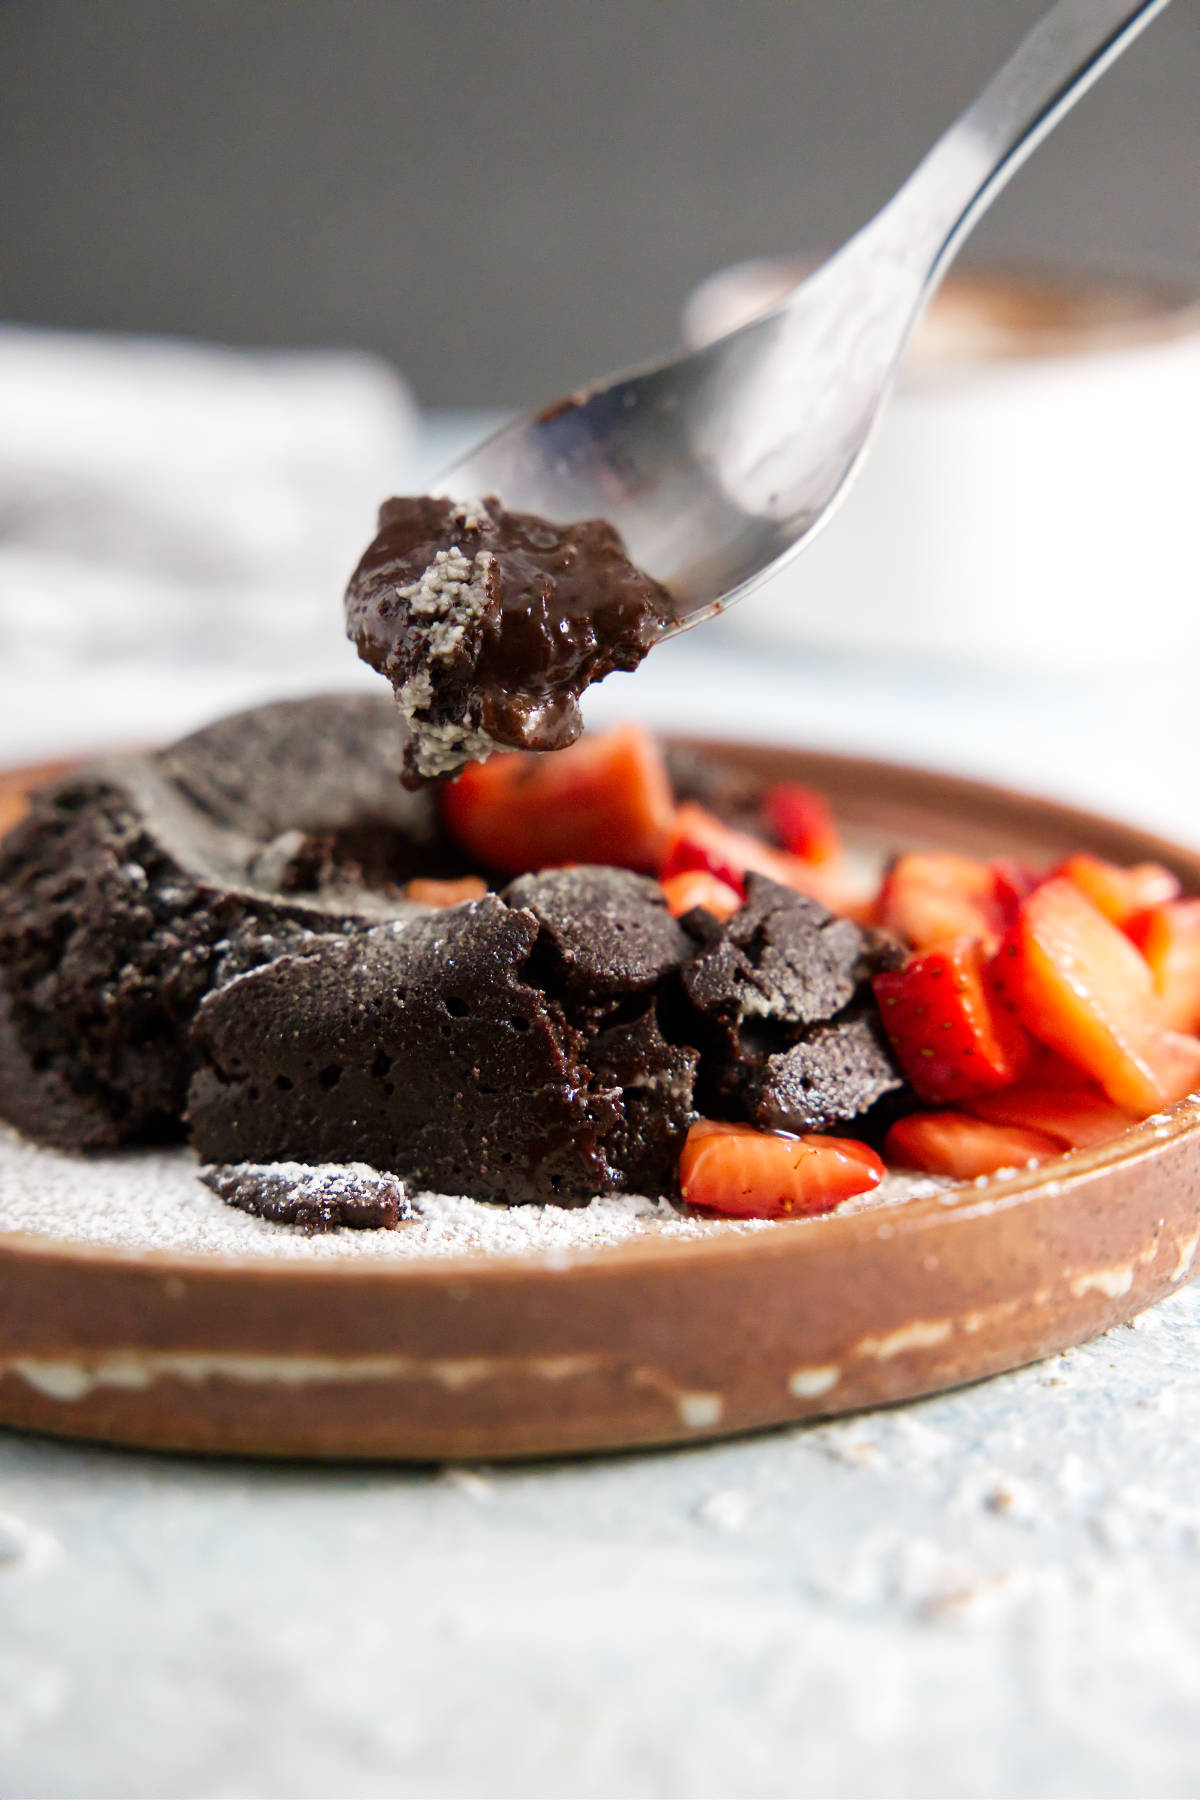 Spoonful of chocolate lava cake with gooey ganache center.